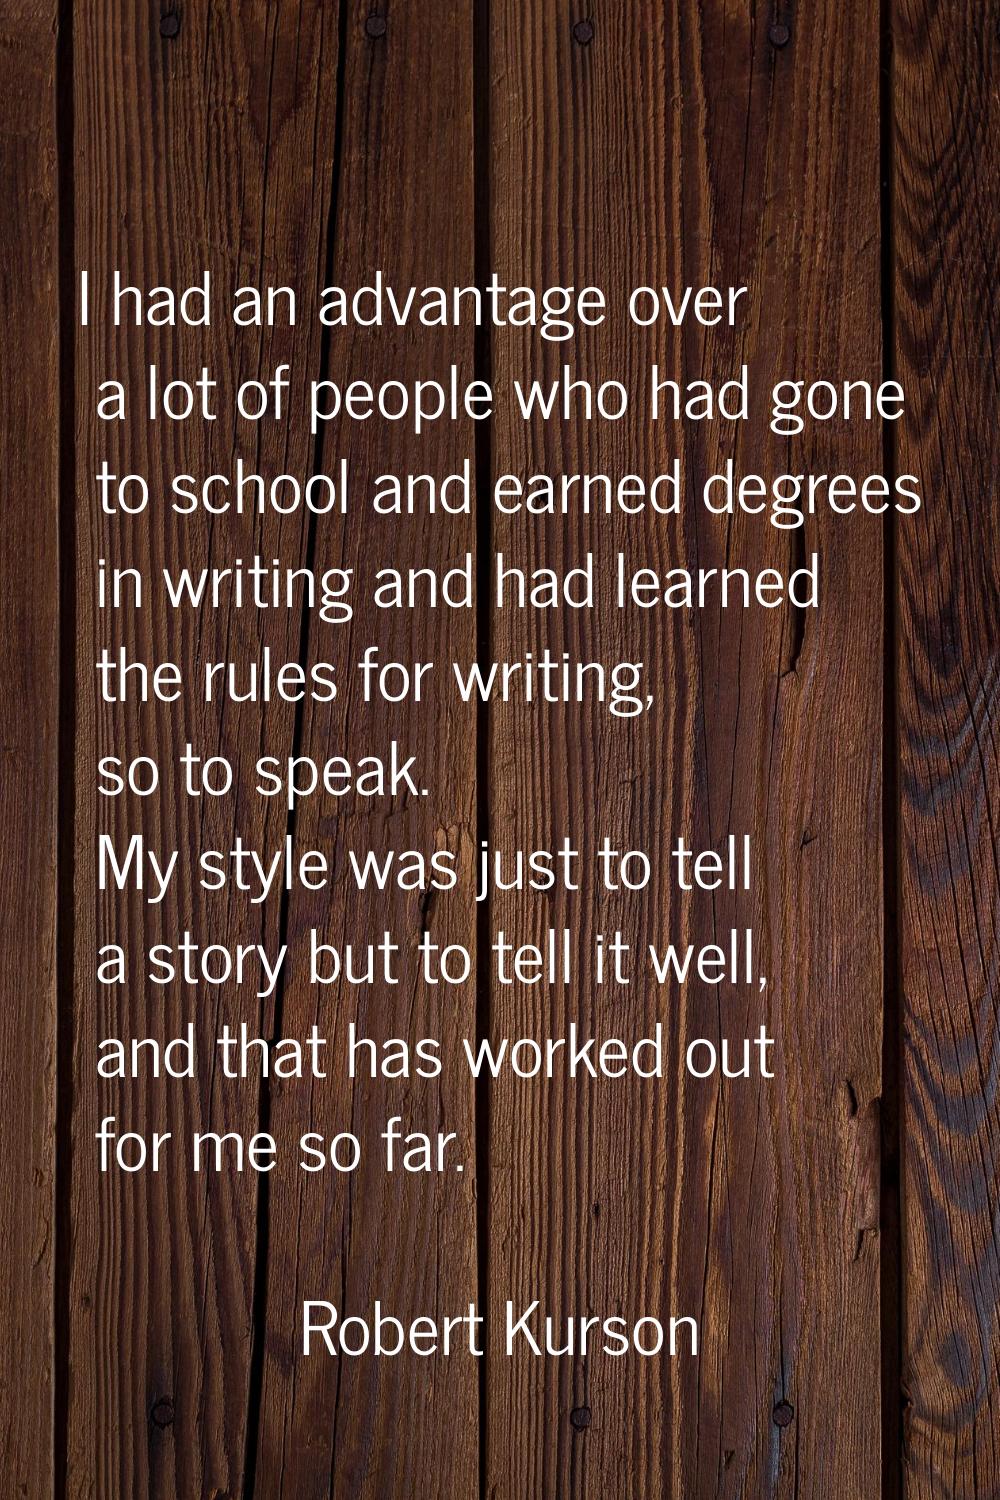 I had an advantage over a lot of people who had gone to school and earned degrees in writing and ha